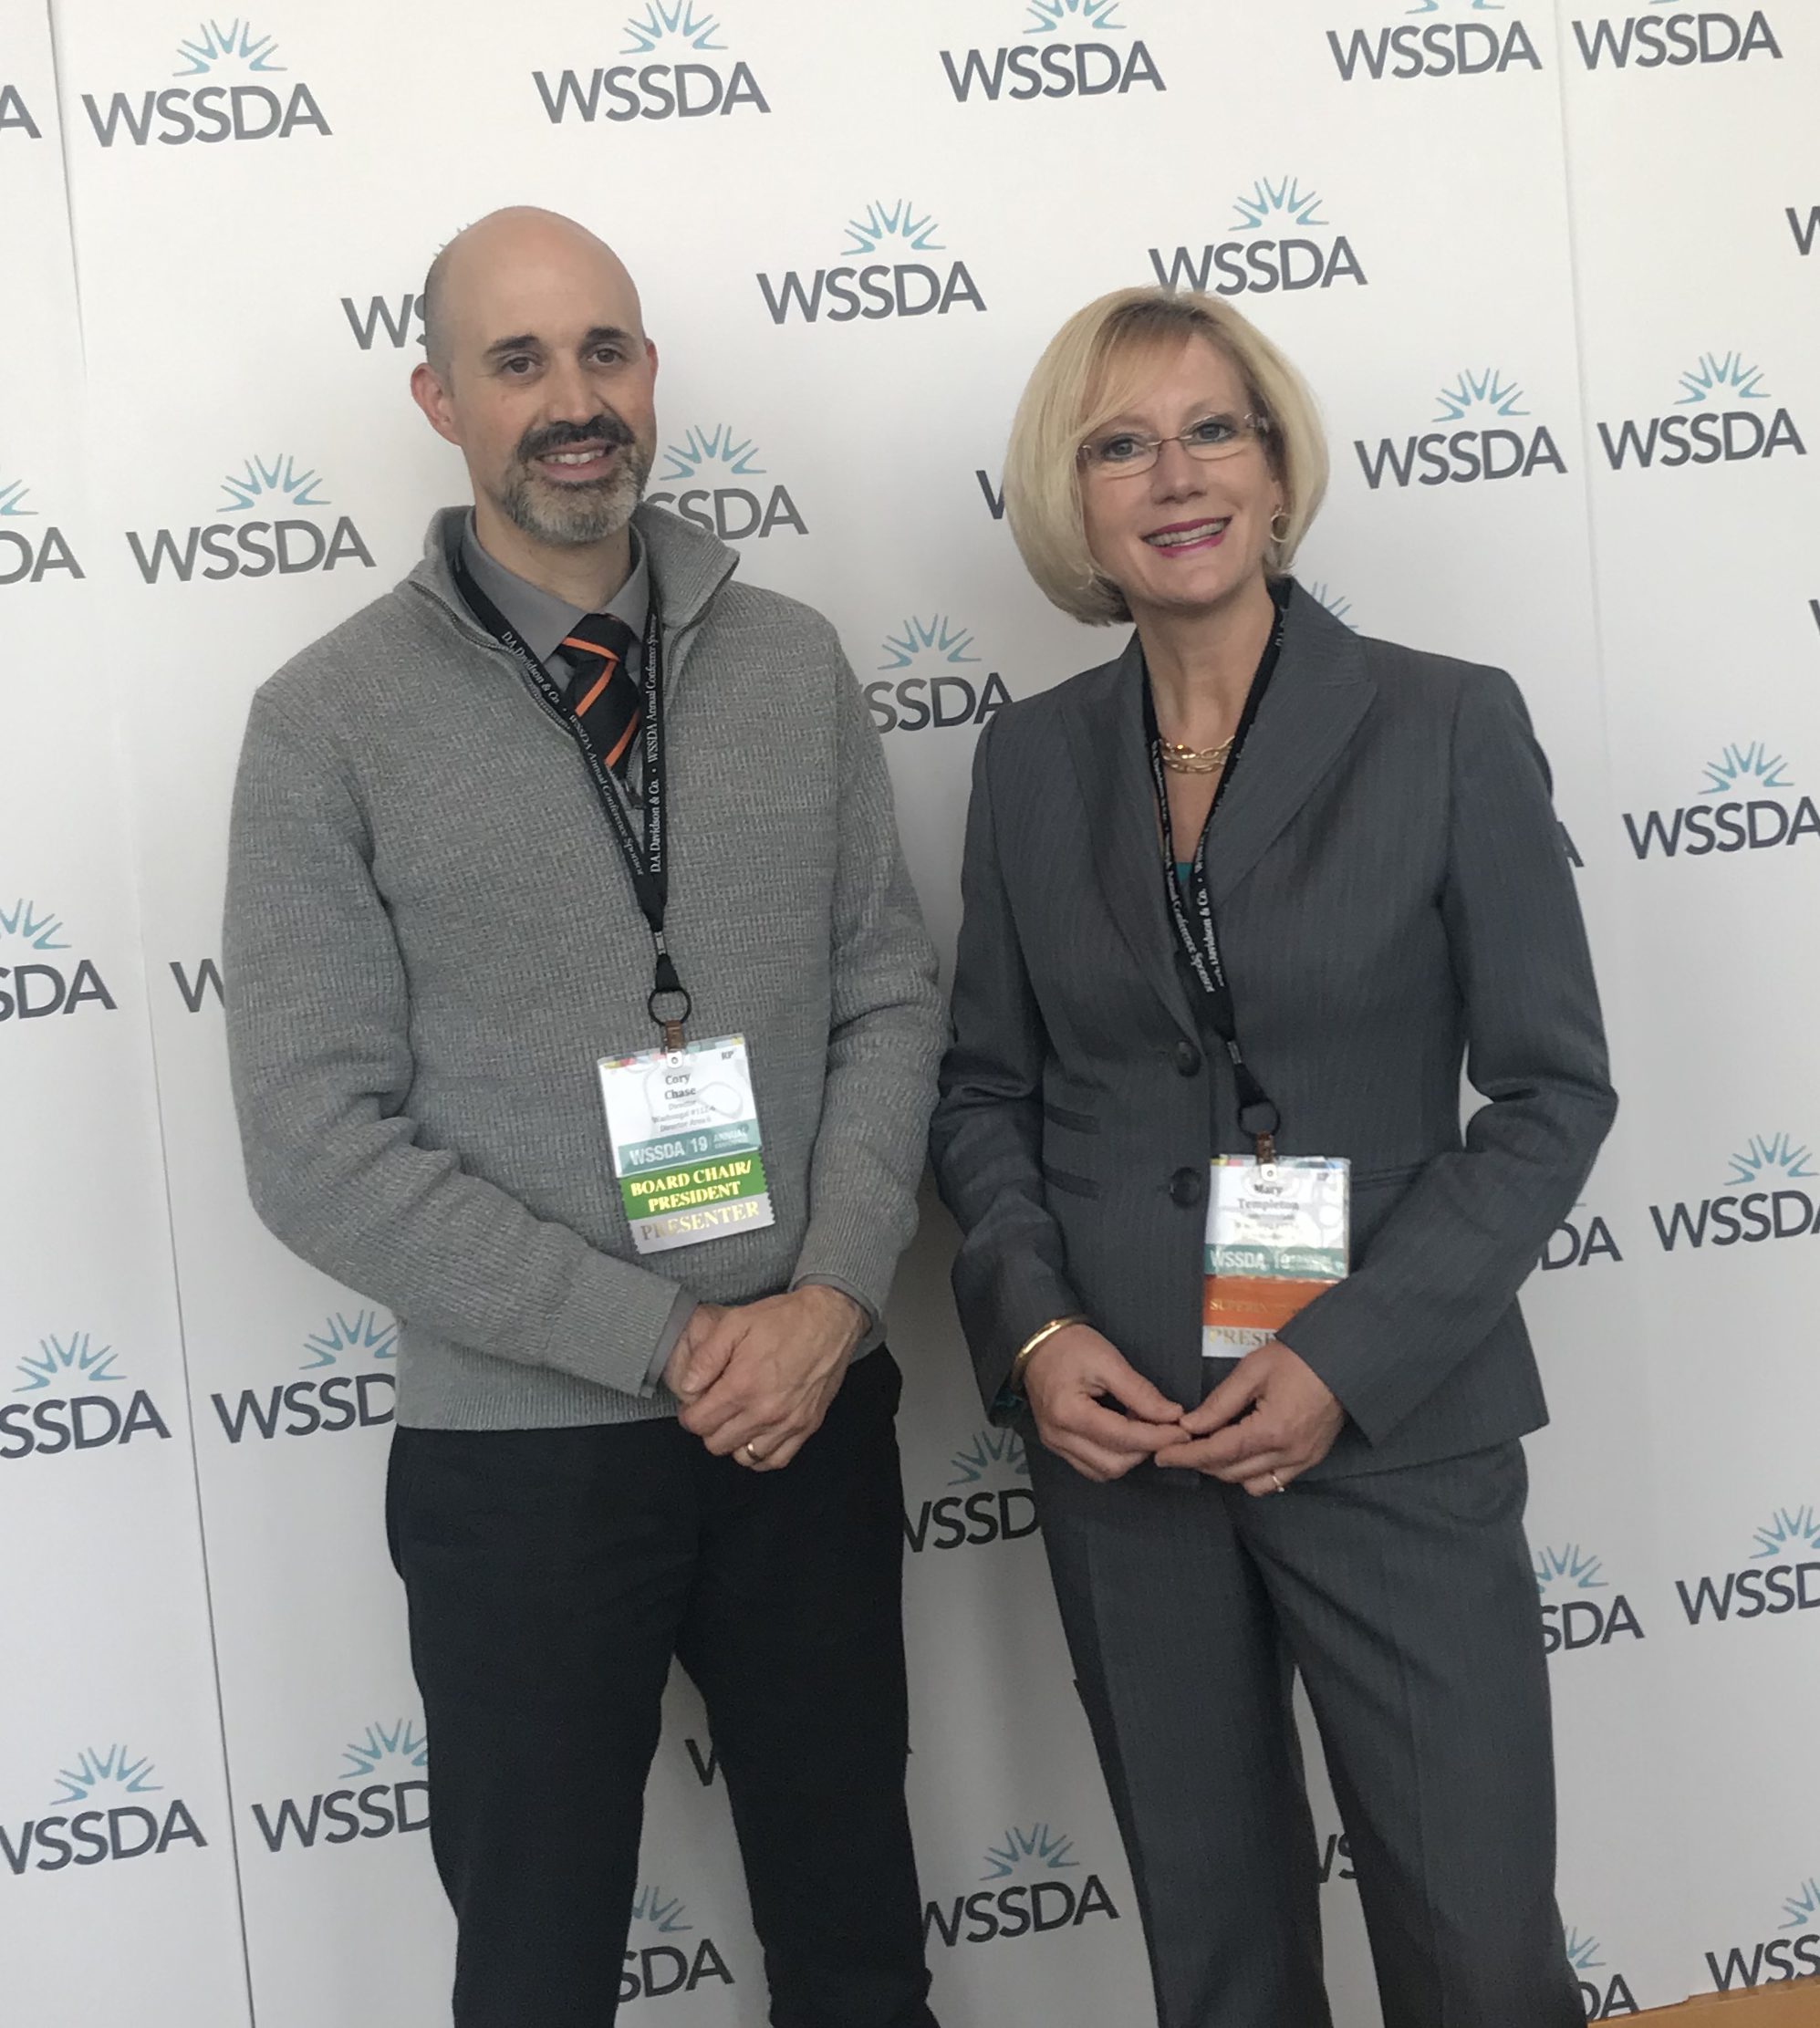 Mary Templeton and Cory Chase present at WSSDA conference Nov 2019 in front of the WSSDA banner